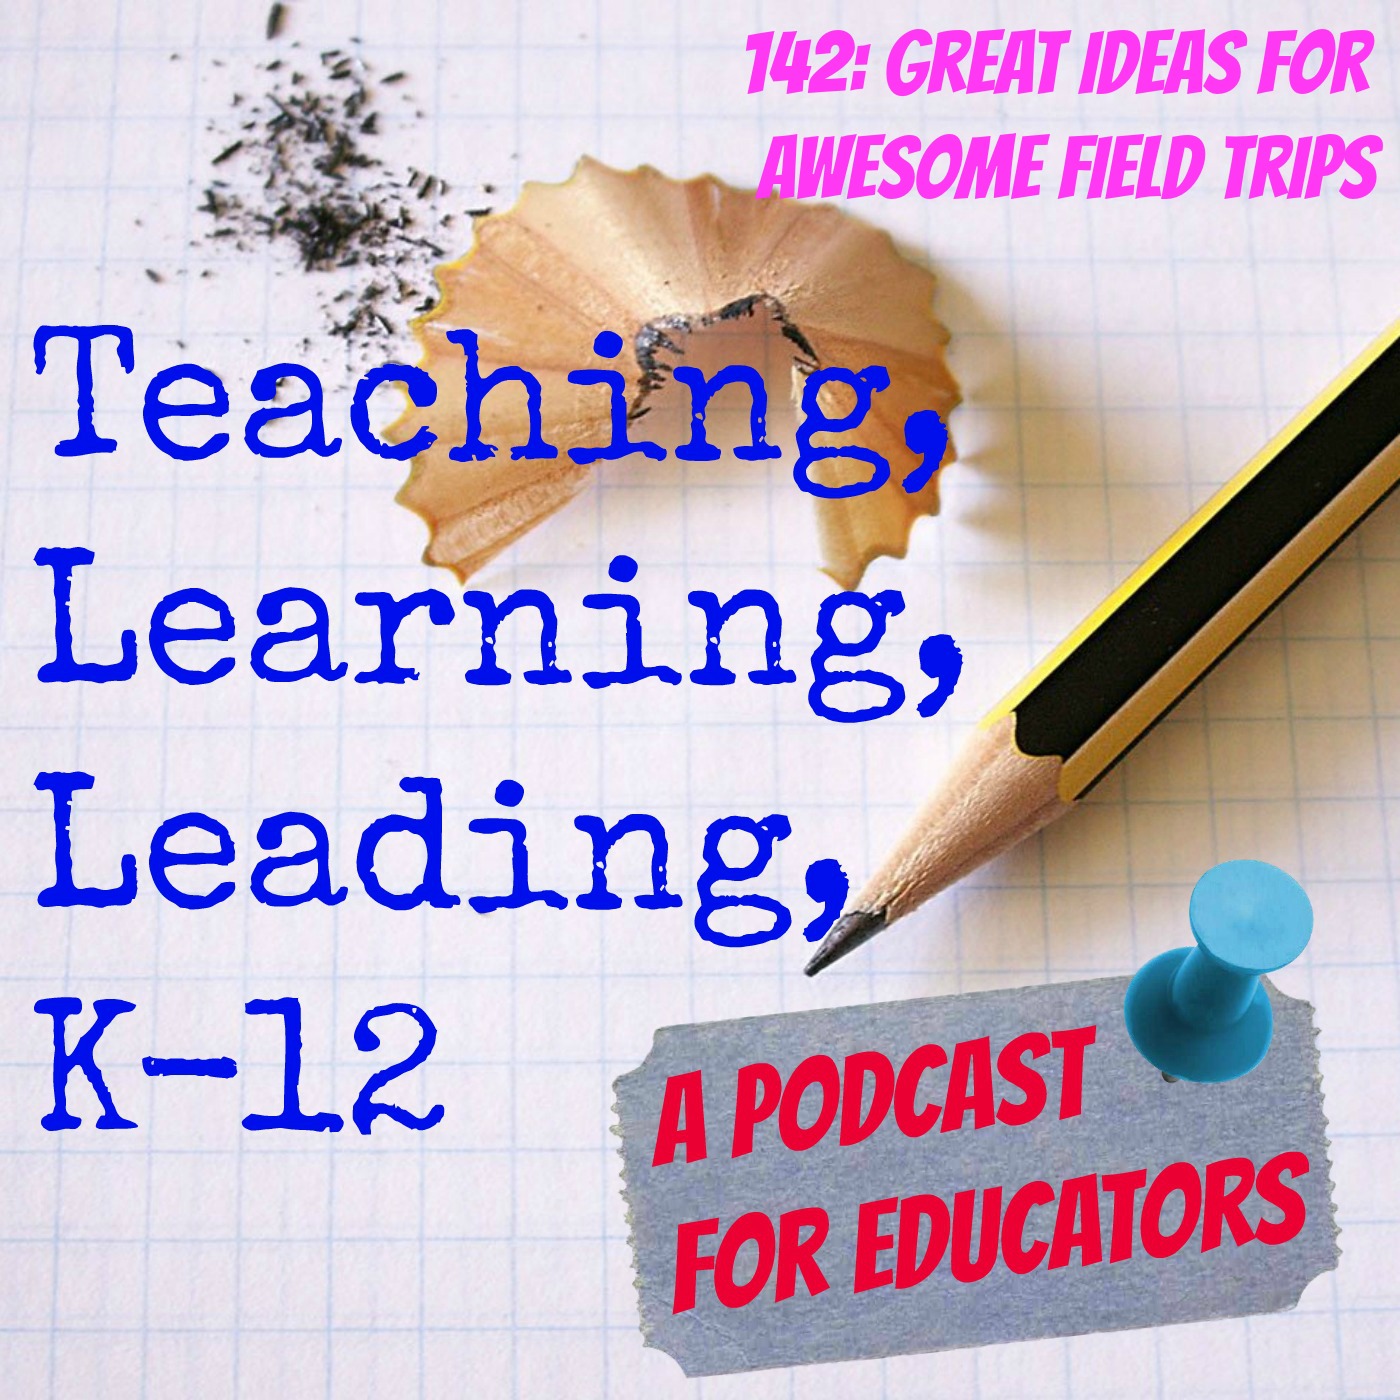 142: Great Ideas for Awesome Field Trips Image